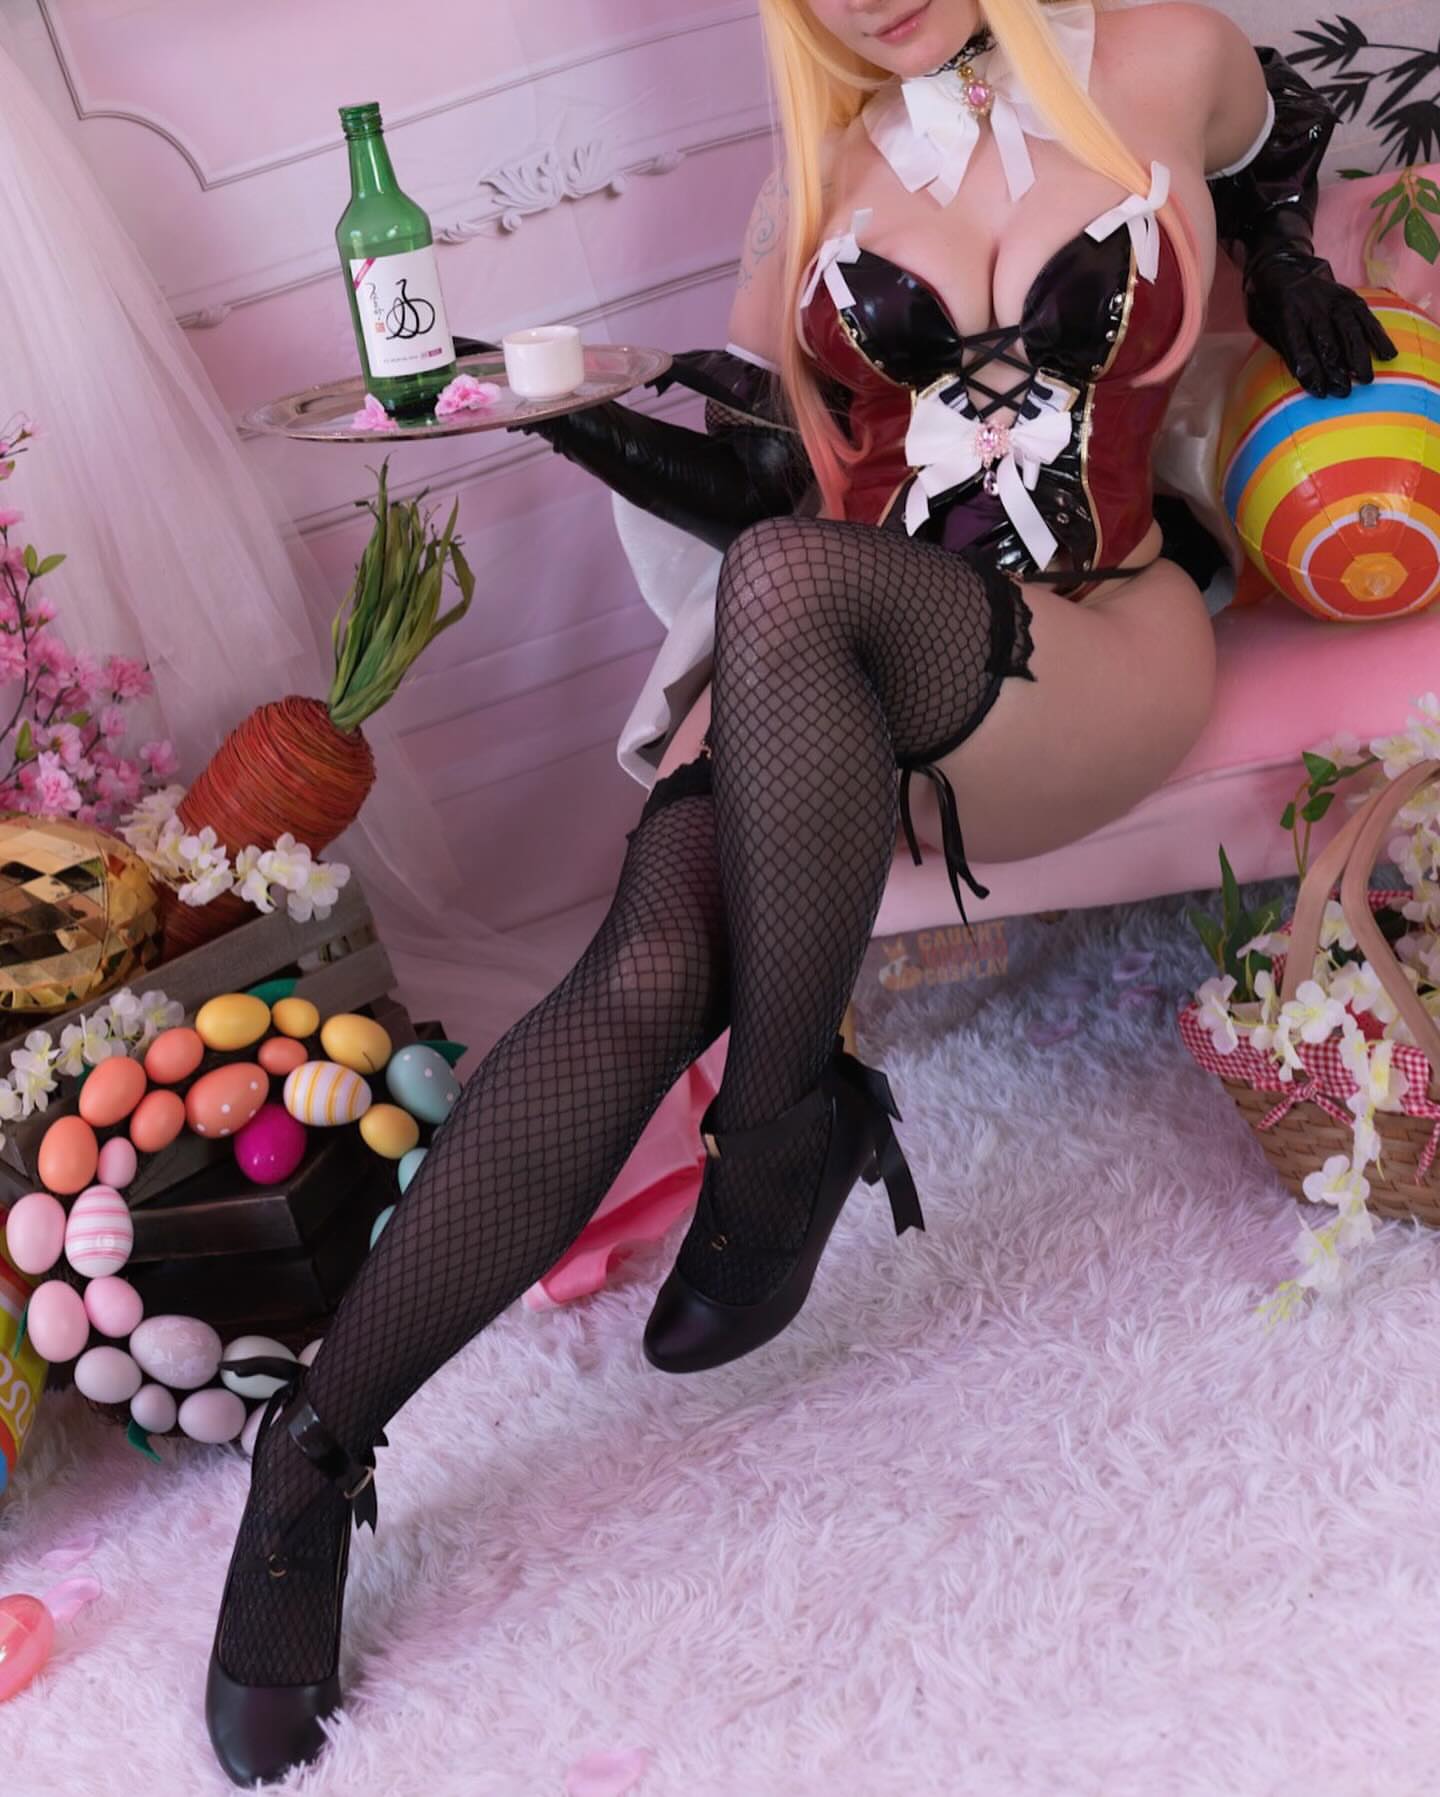 Happy Easter 🐰💕

Had so much fun shooting this Marin bunny suit look with @corrosive.art